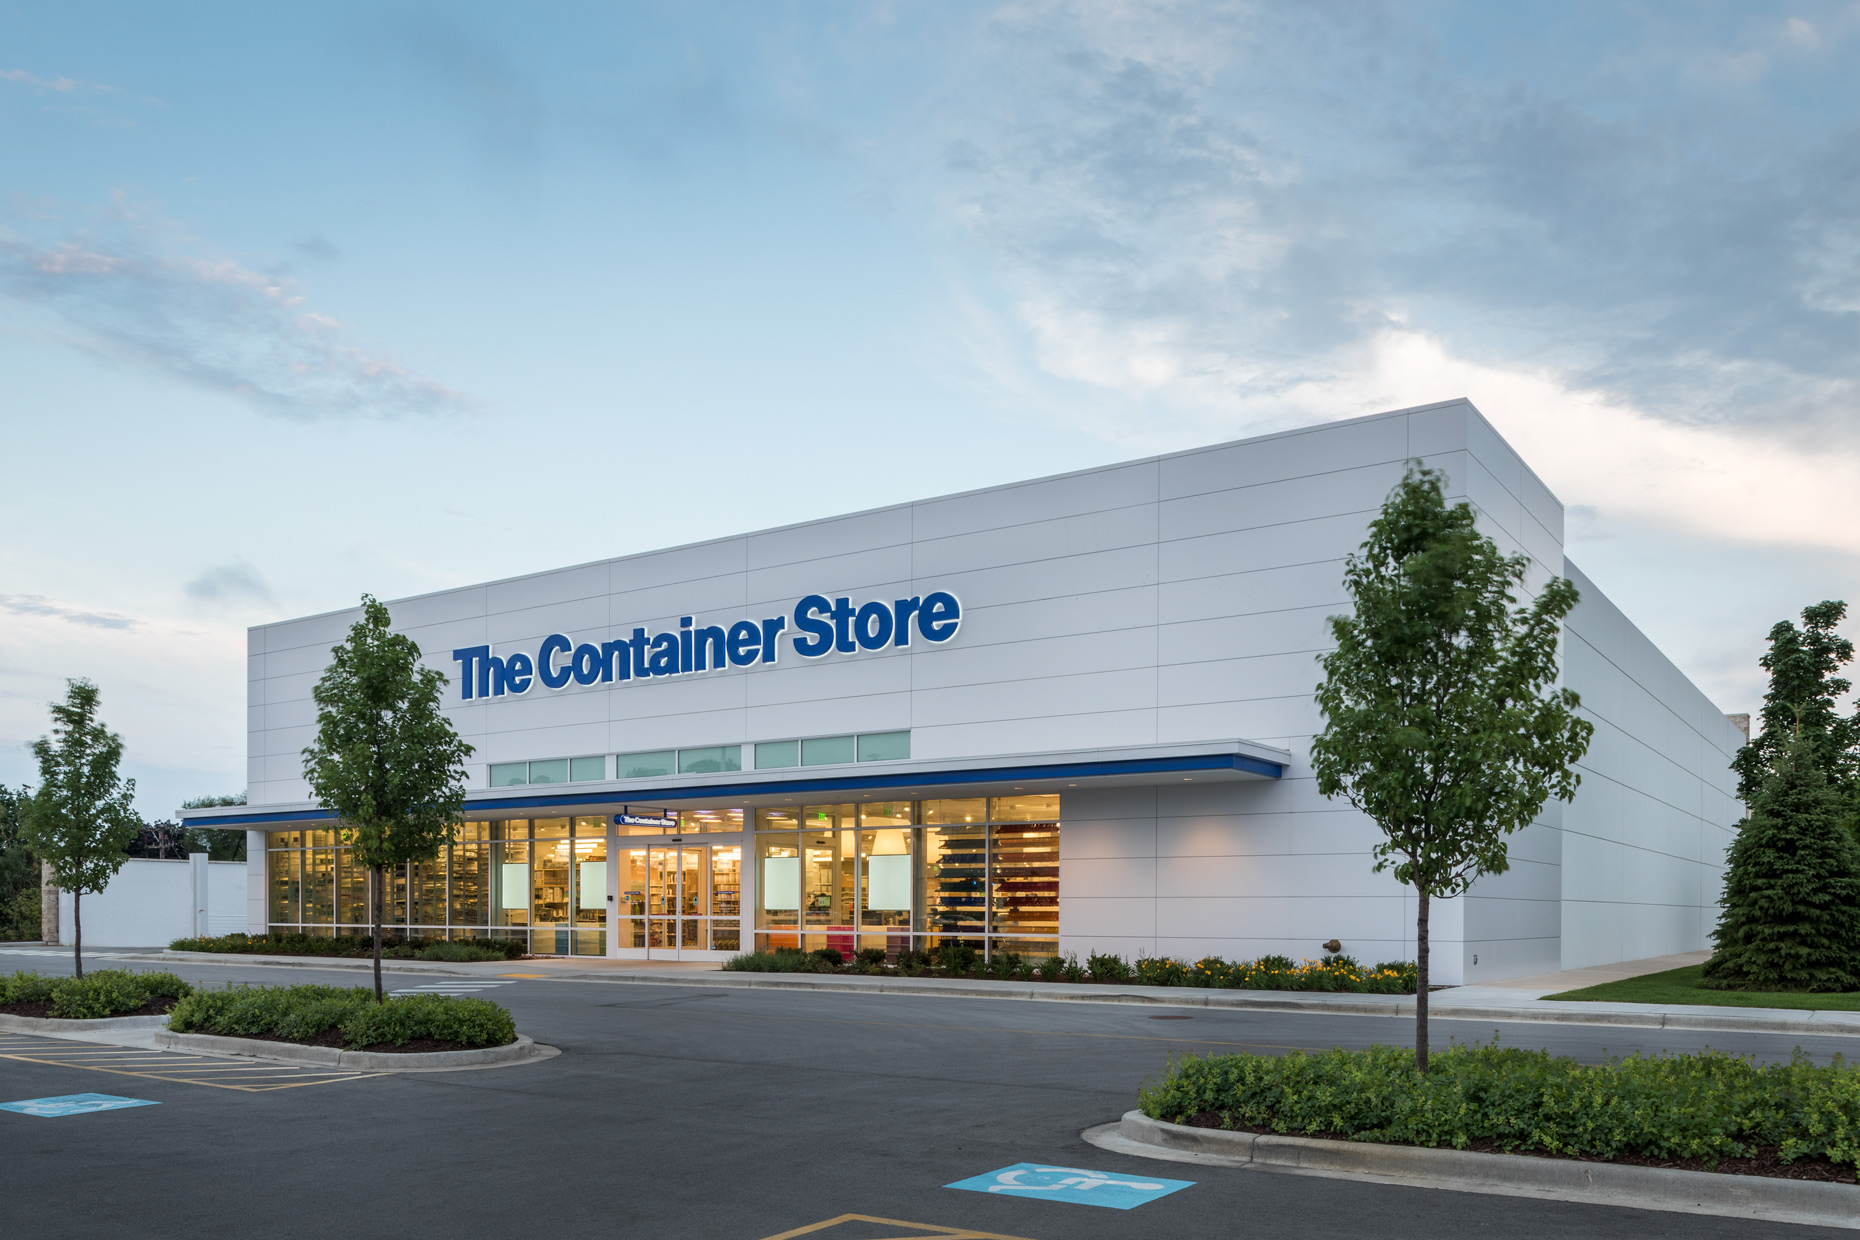 The Container Store architectural exterior photography by Kevin Brown